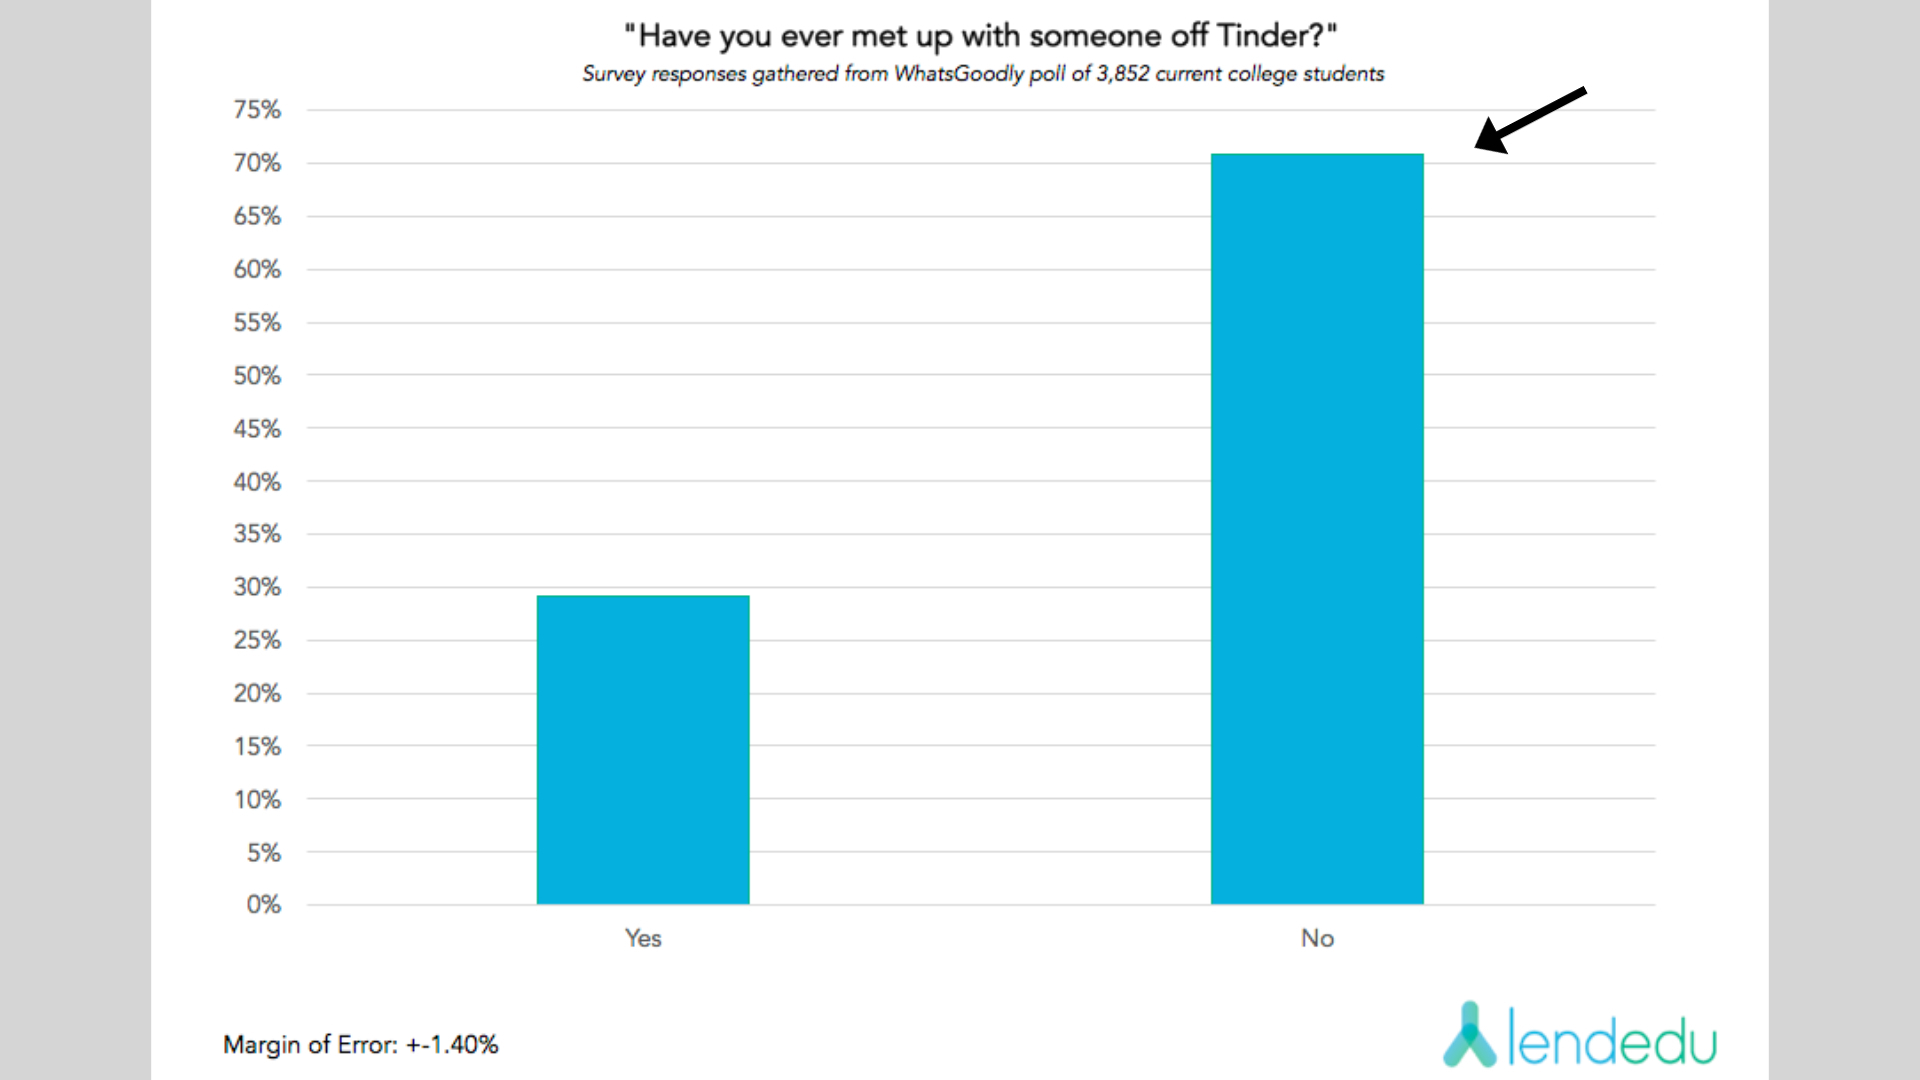 Most Tinder users have never gotten a date from the app